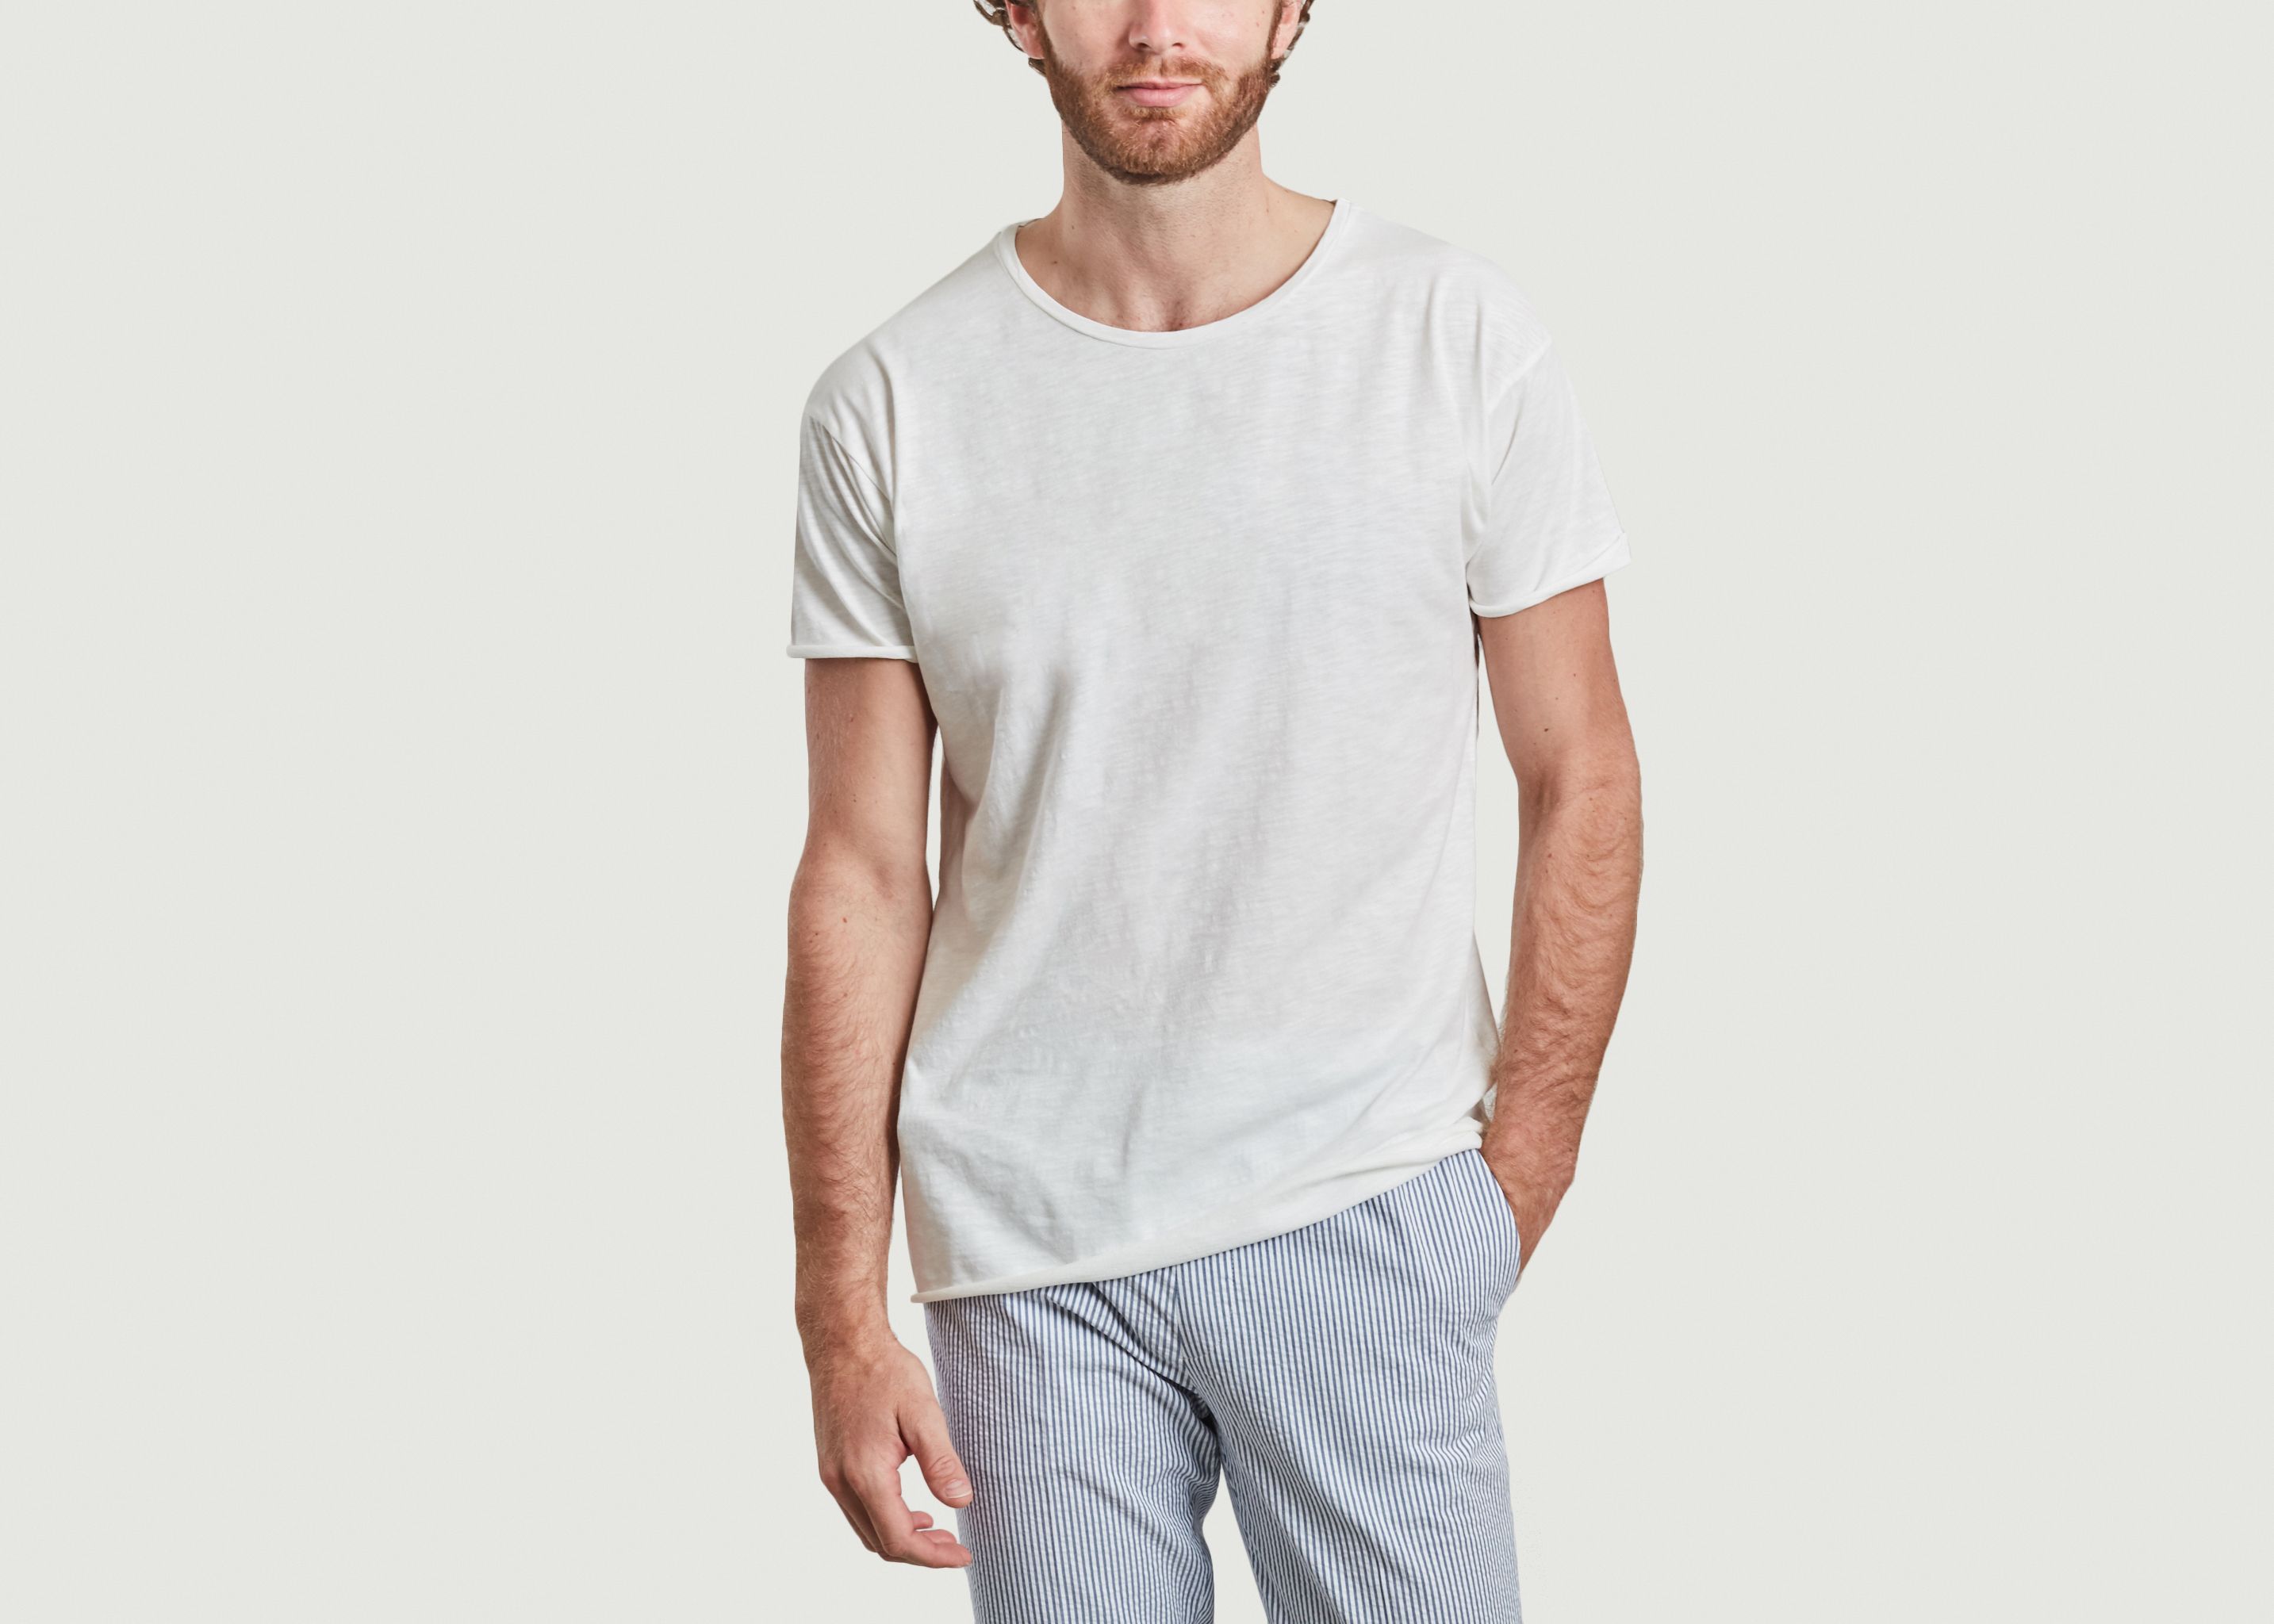 Roger relaxed fit slub t-shirt - Nudie Jeans